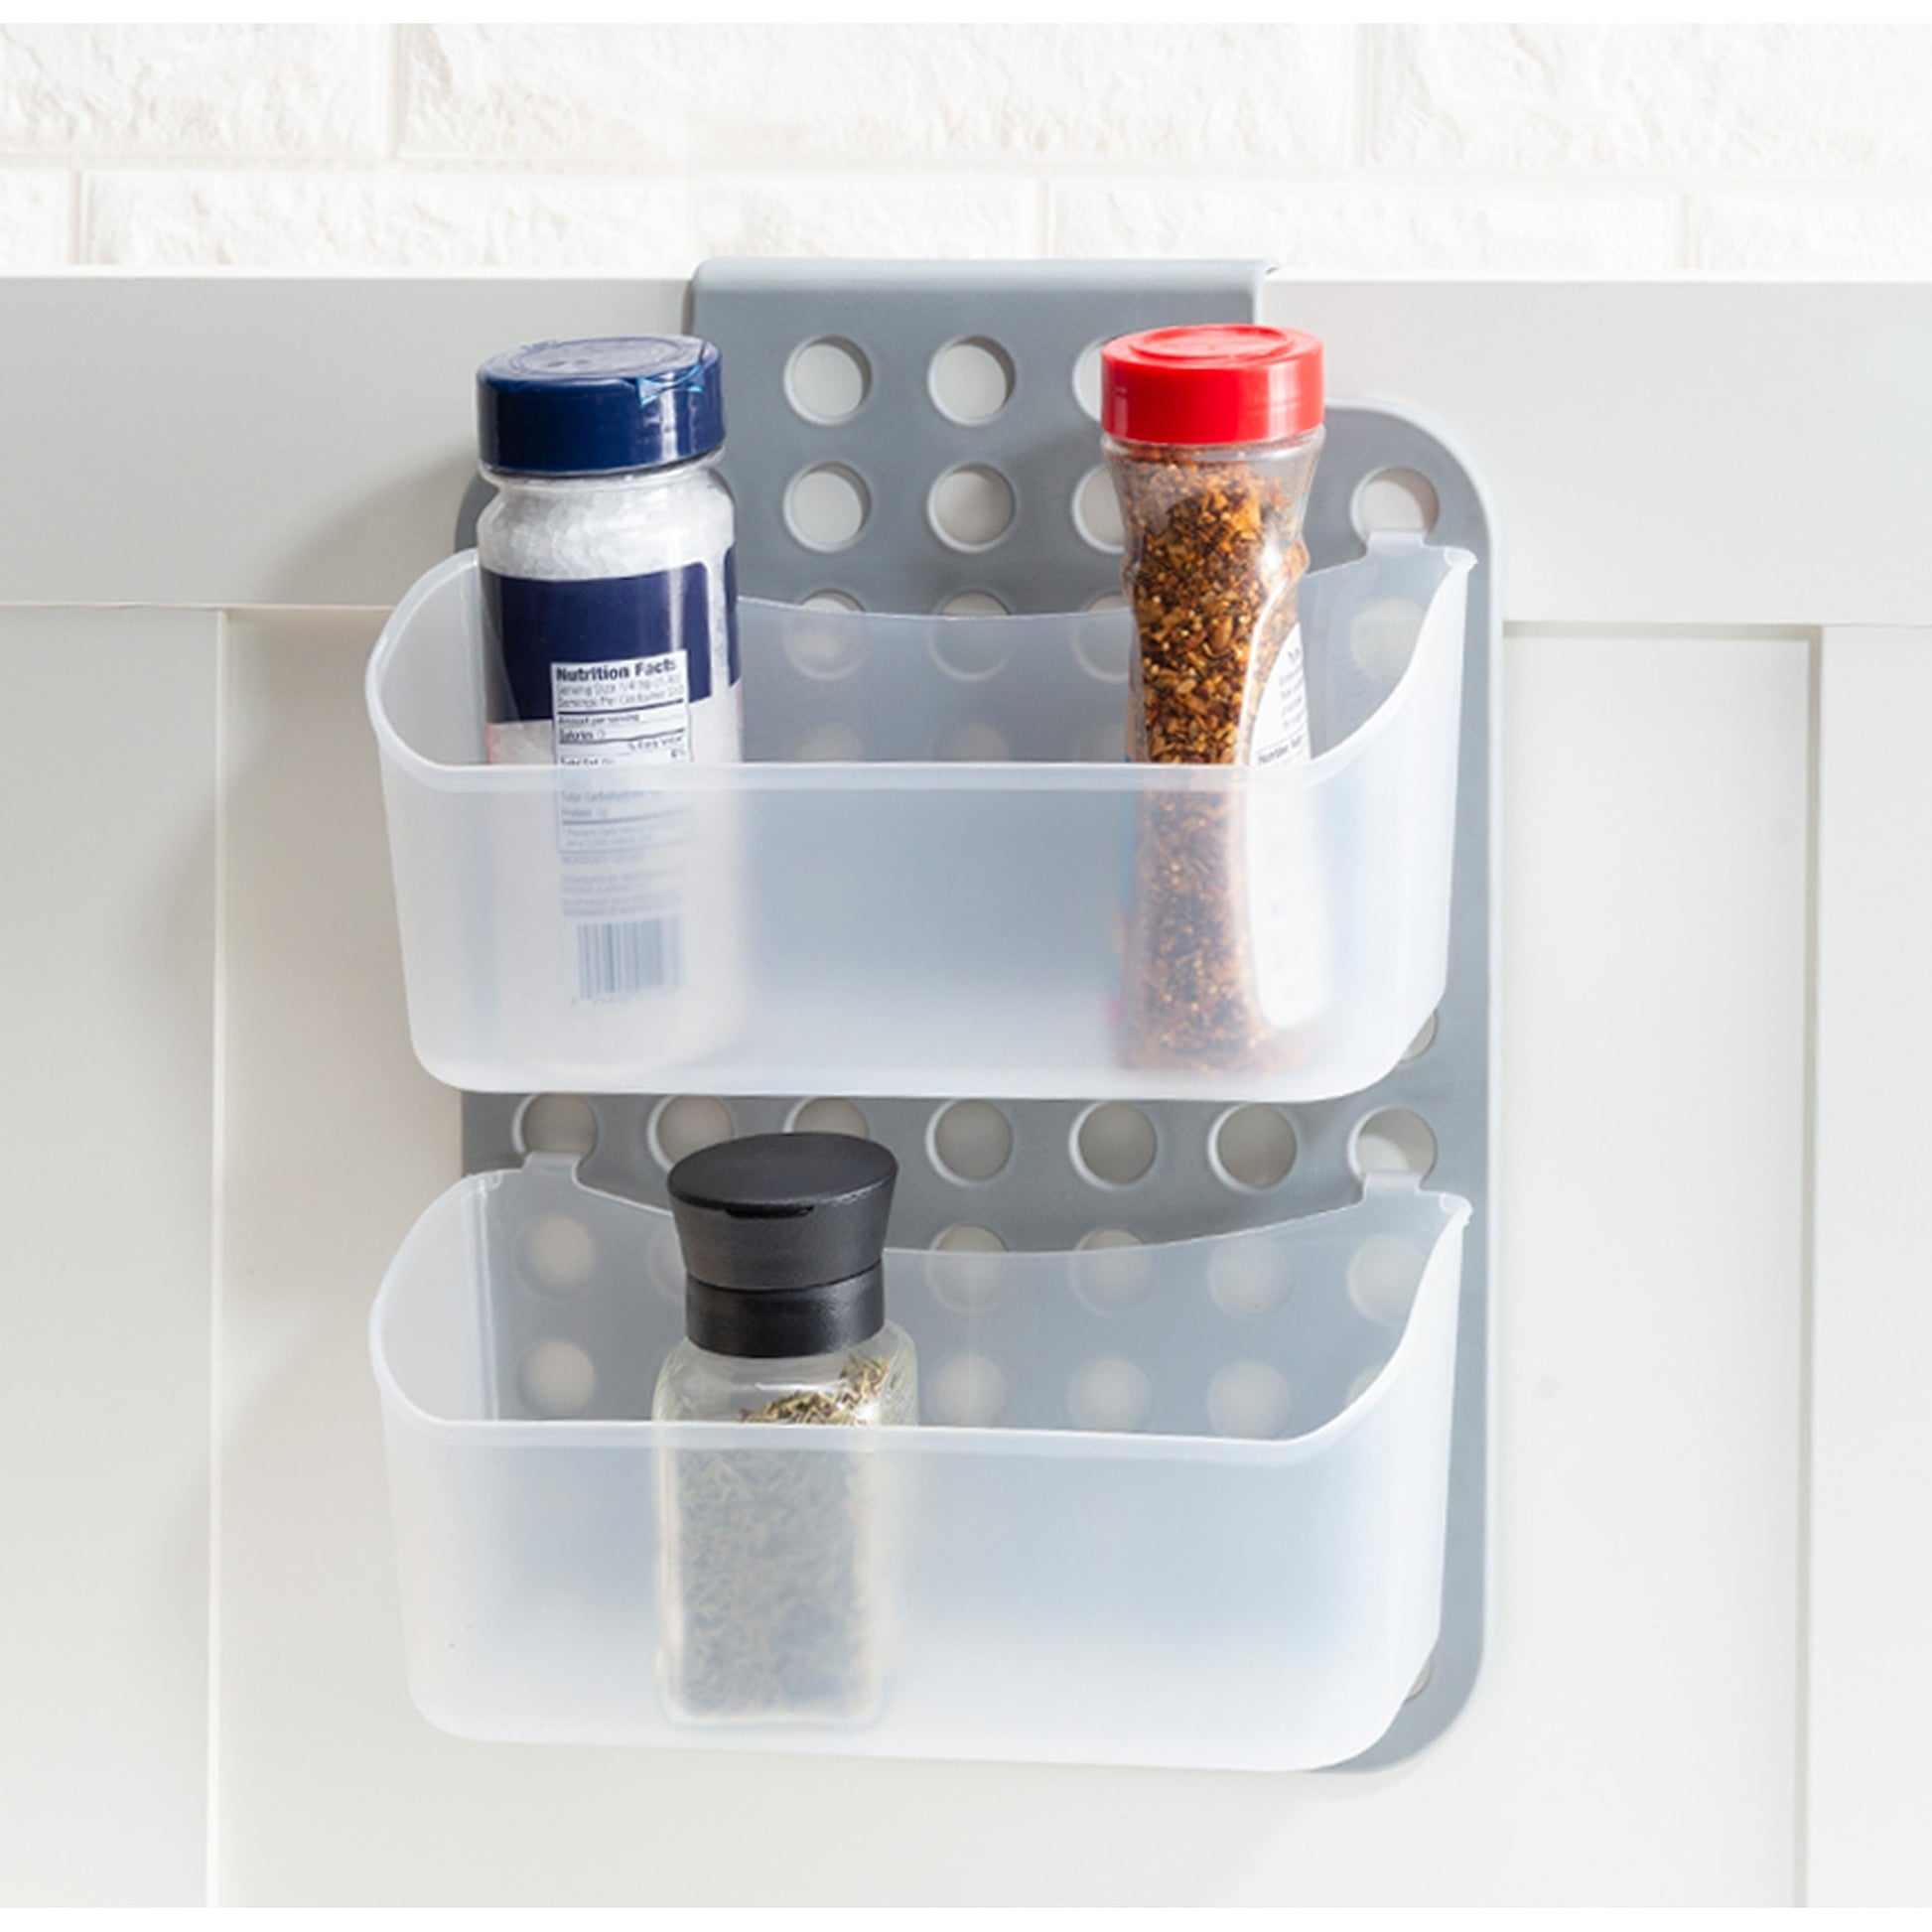 Home Basics Adjustable Over The Cabinet Plastic Organizer, Clear and Grey